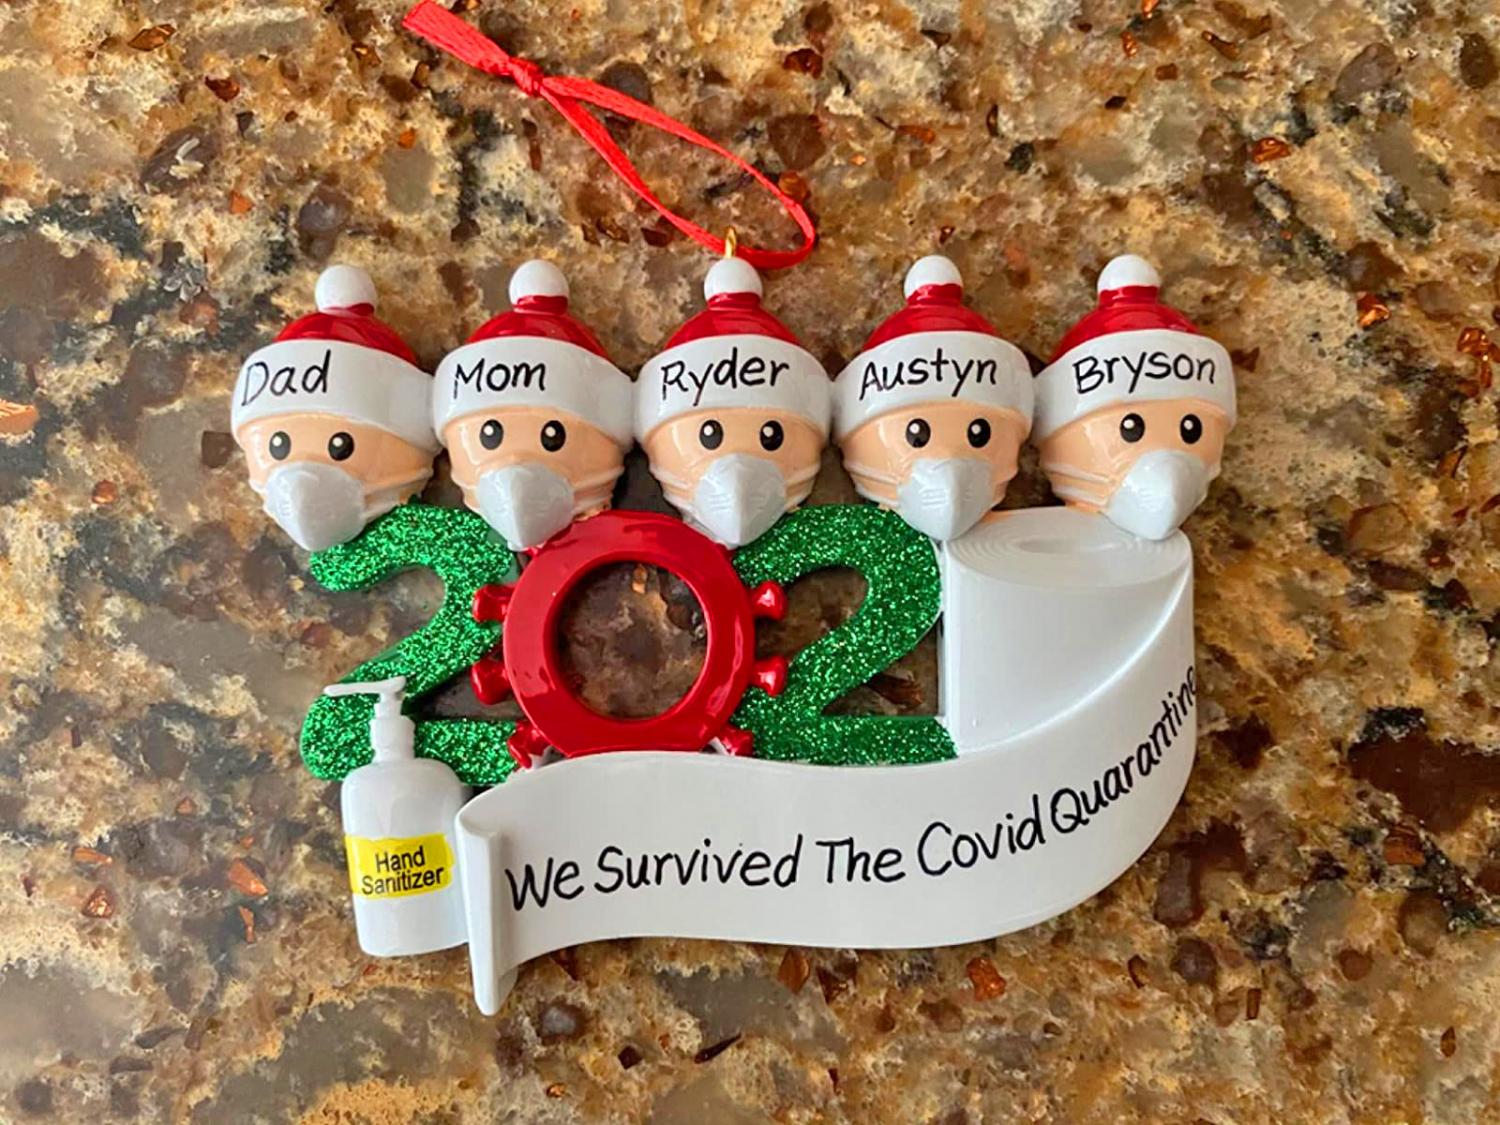 JOKBEN Covid Christmas 2020 Ornaments,Personalized Quarantine Survived Family Christmas Hanging Ornament with Toilet Paper Crisis,Special Keepsake Xmas Decorations Gifts for Christmas Tree Decor 